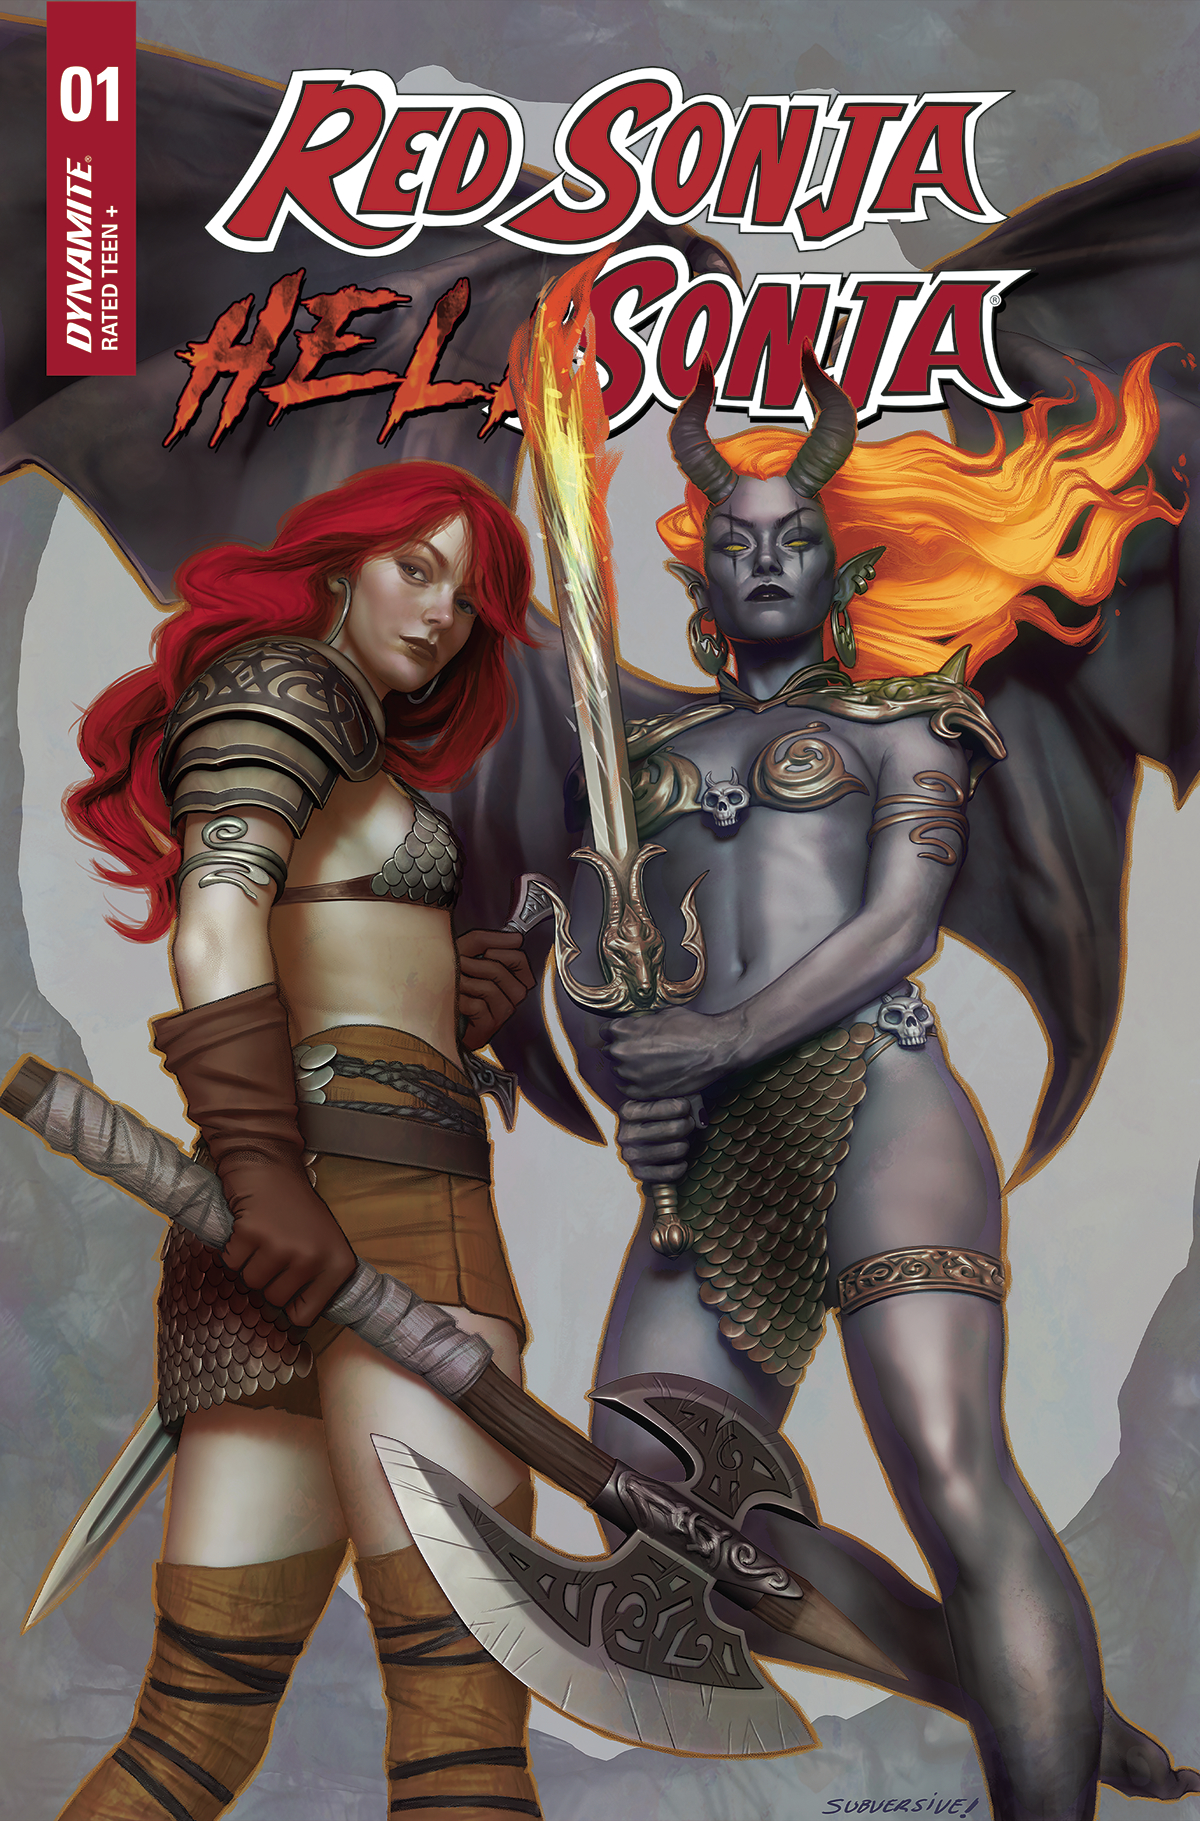 Red Sonja Hell Sonja #1 Cover D Puebla